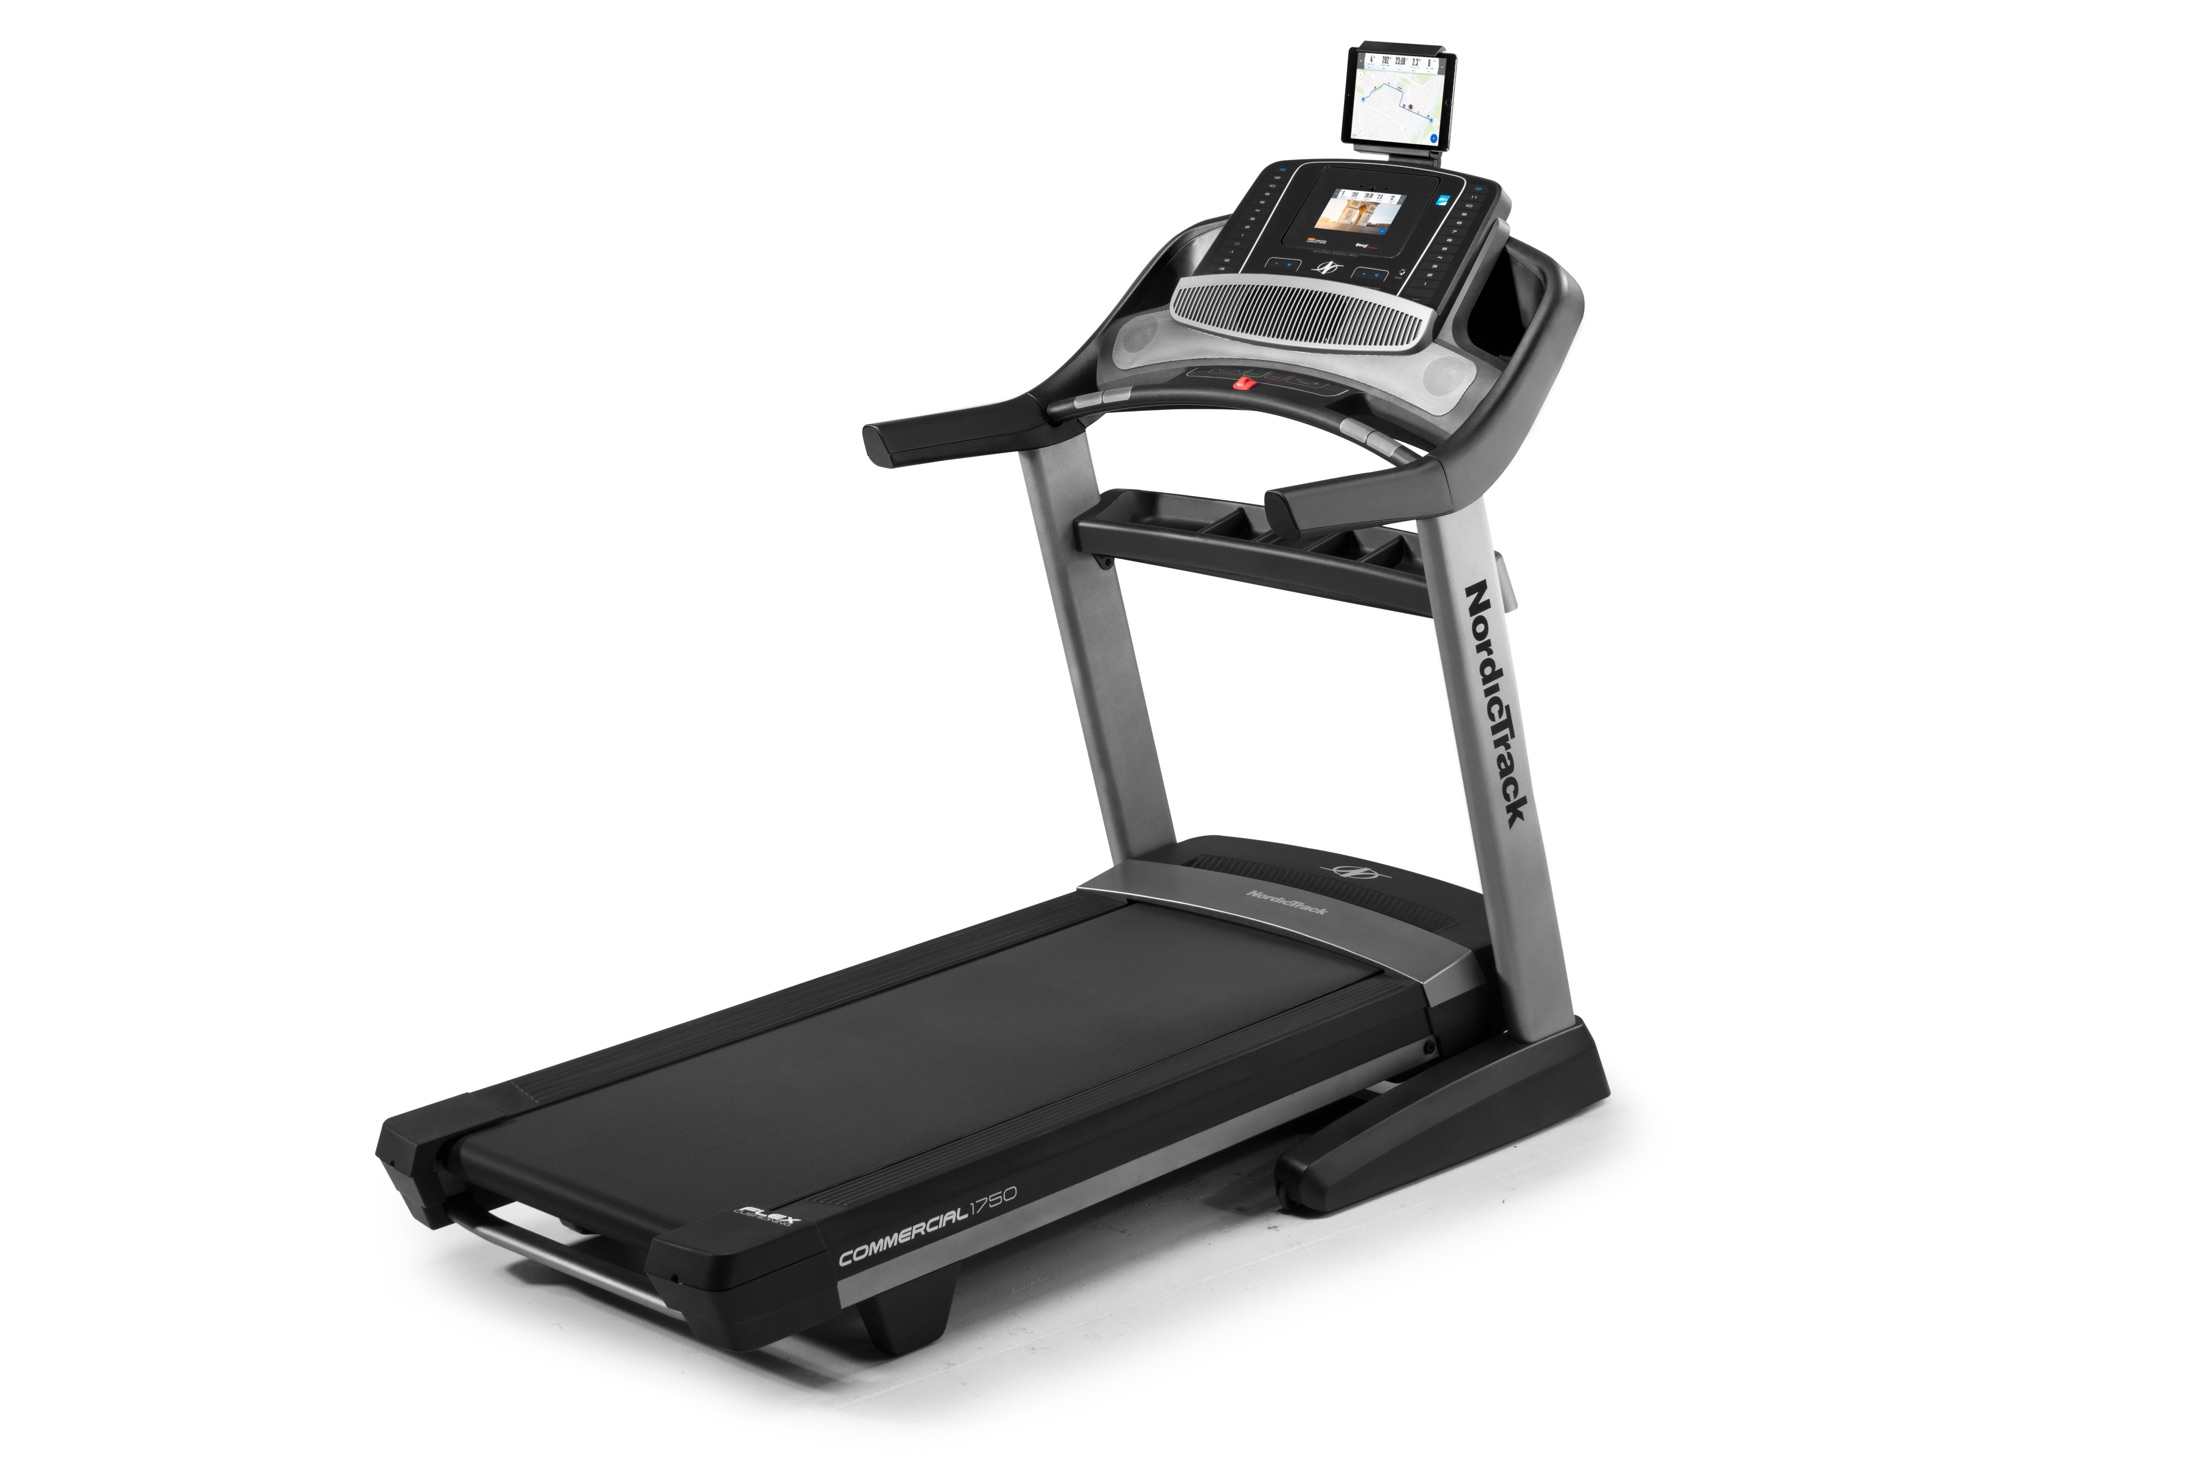 Used Treadmill - NordicTrack Commercial 1750